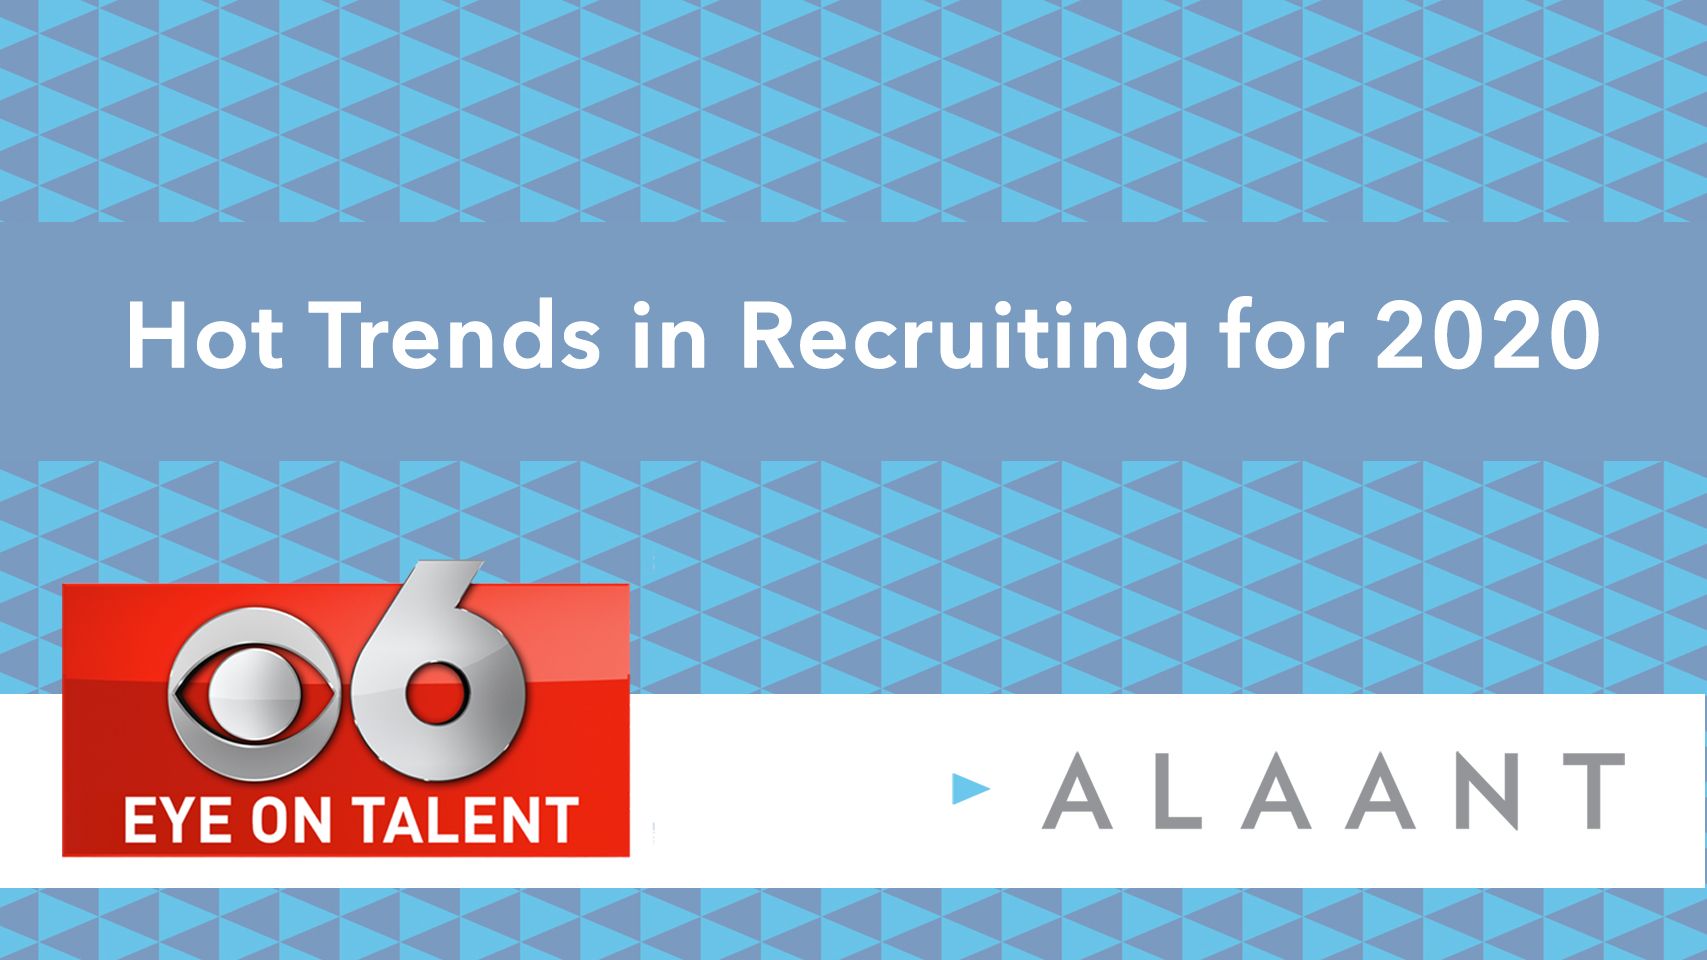 Alaant Eye on Talent Hot Trends in Recruiting for 2020